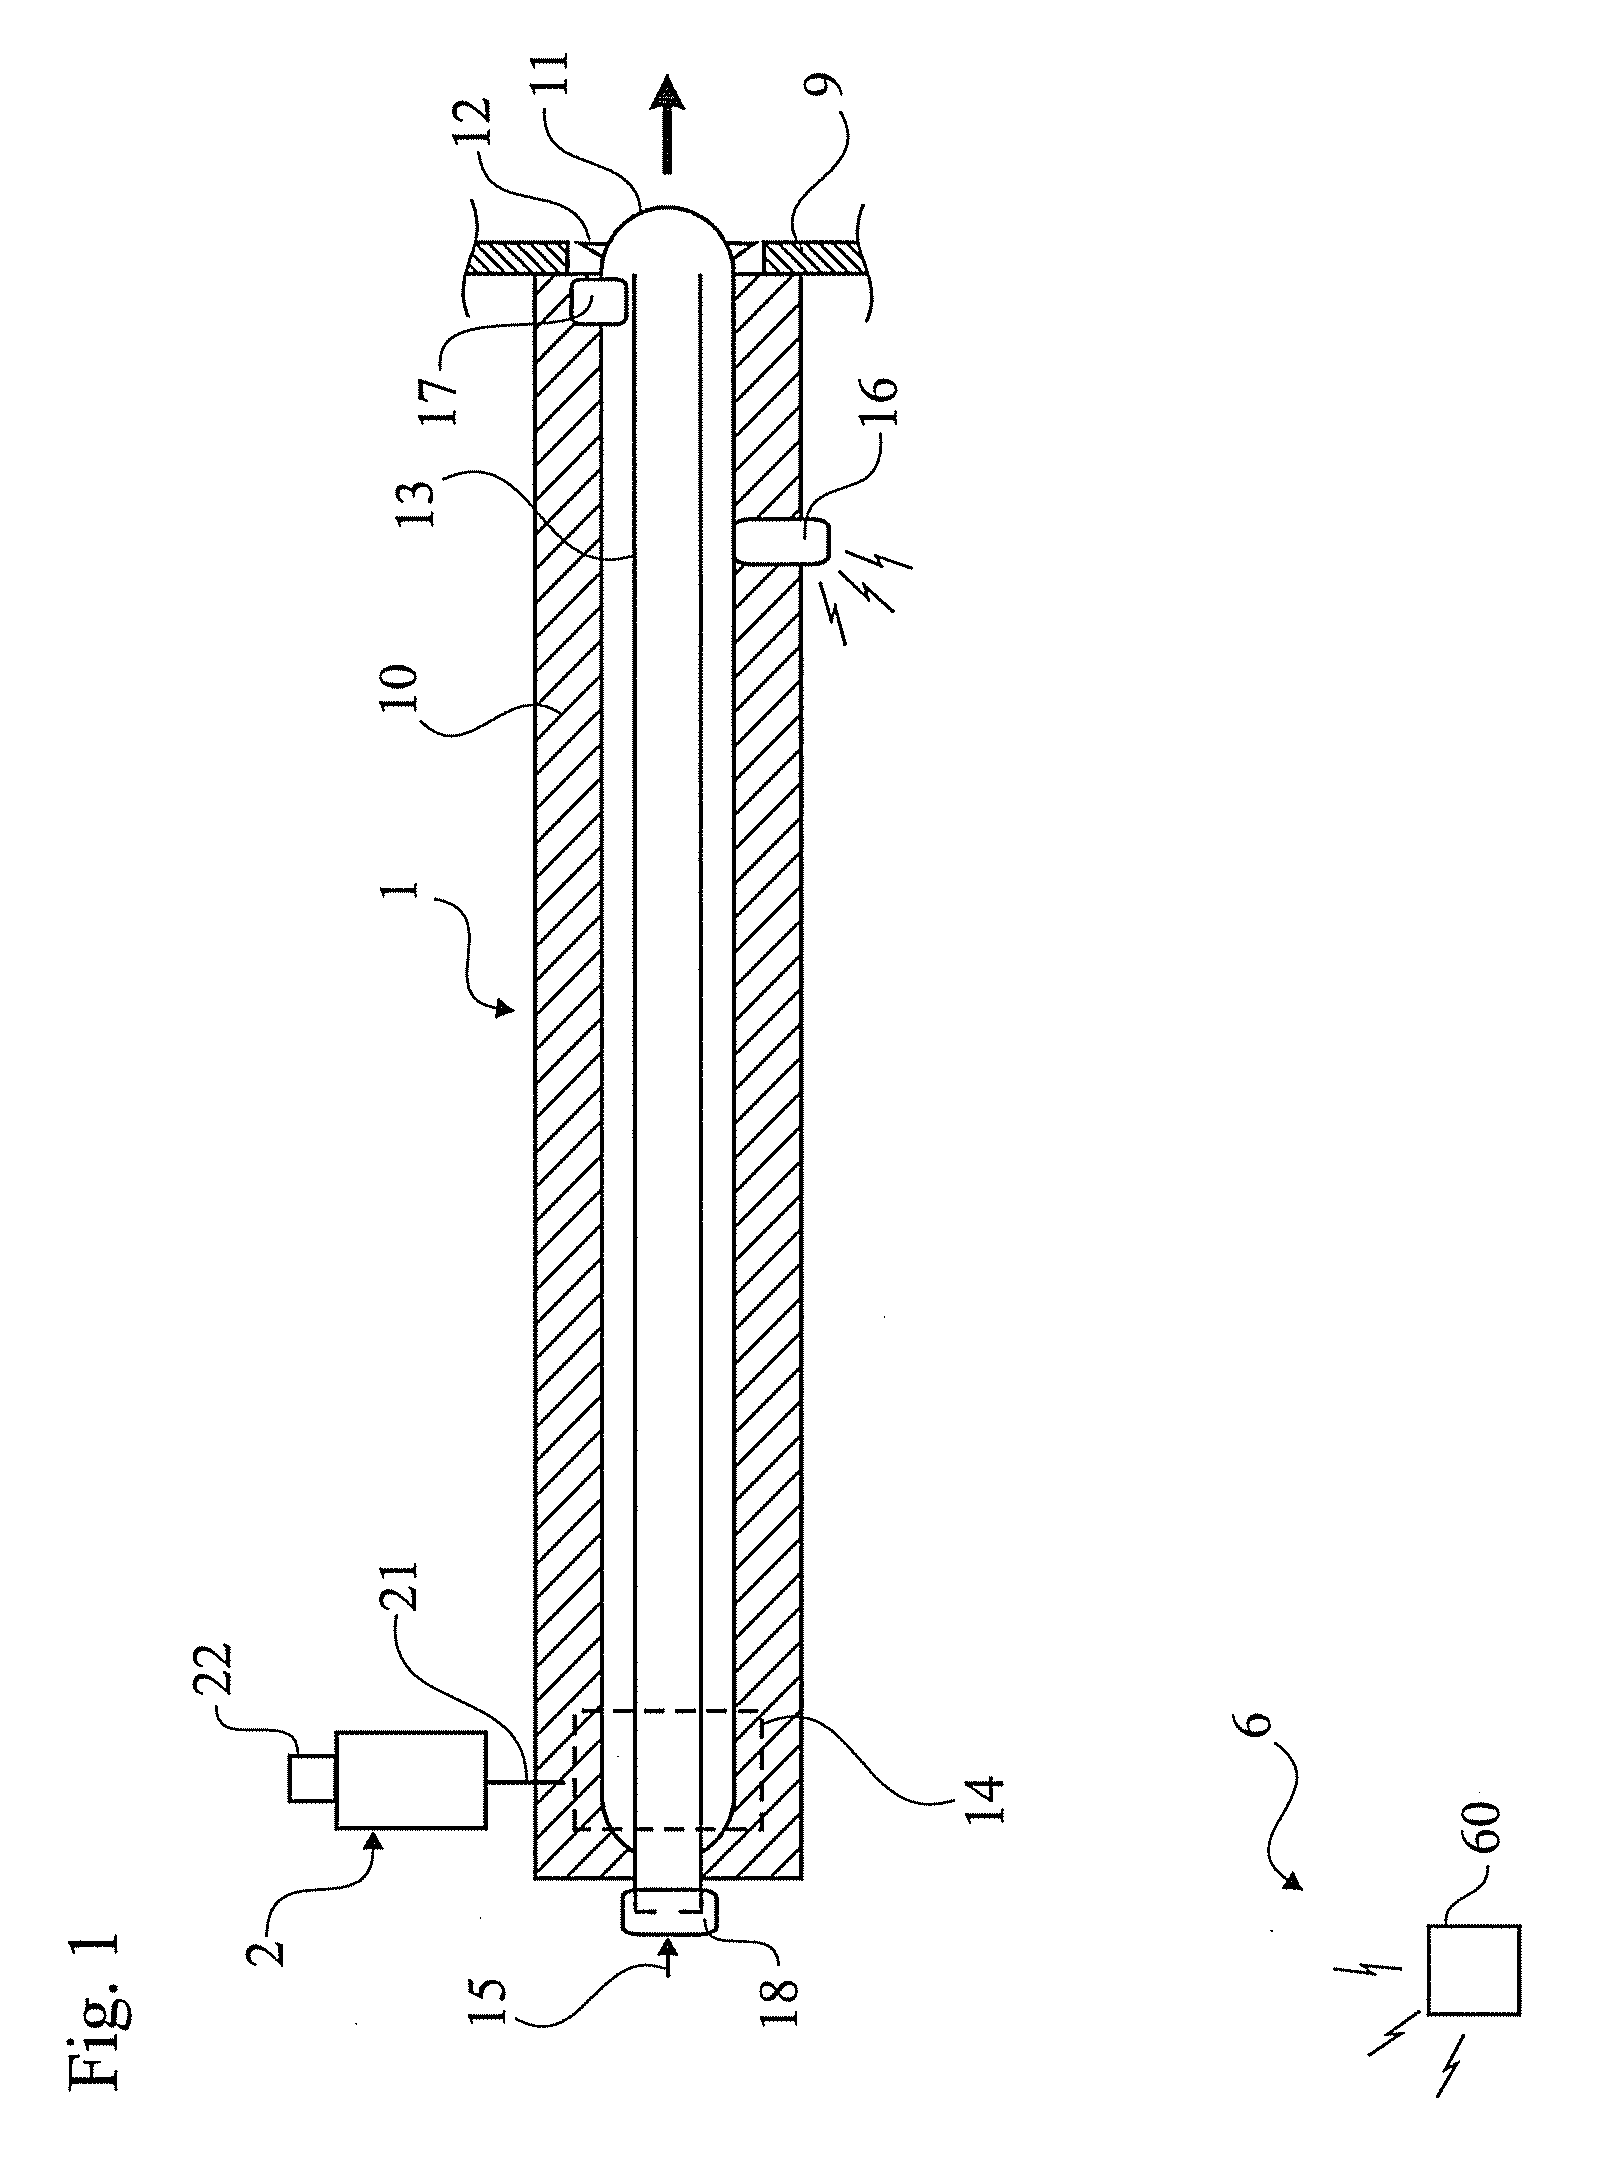 Method for measuring conditions in a power boiler furnace using a sootblower